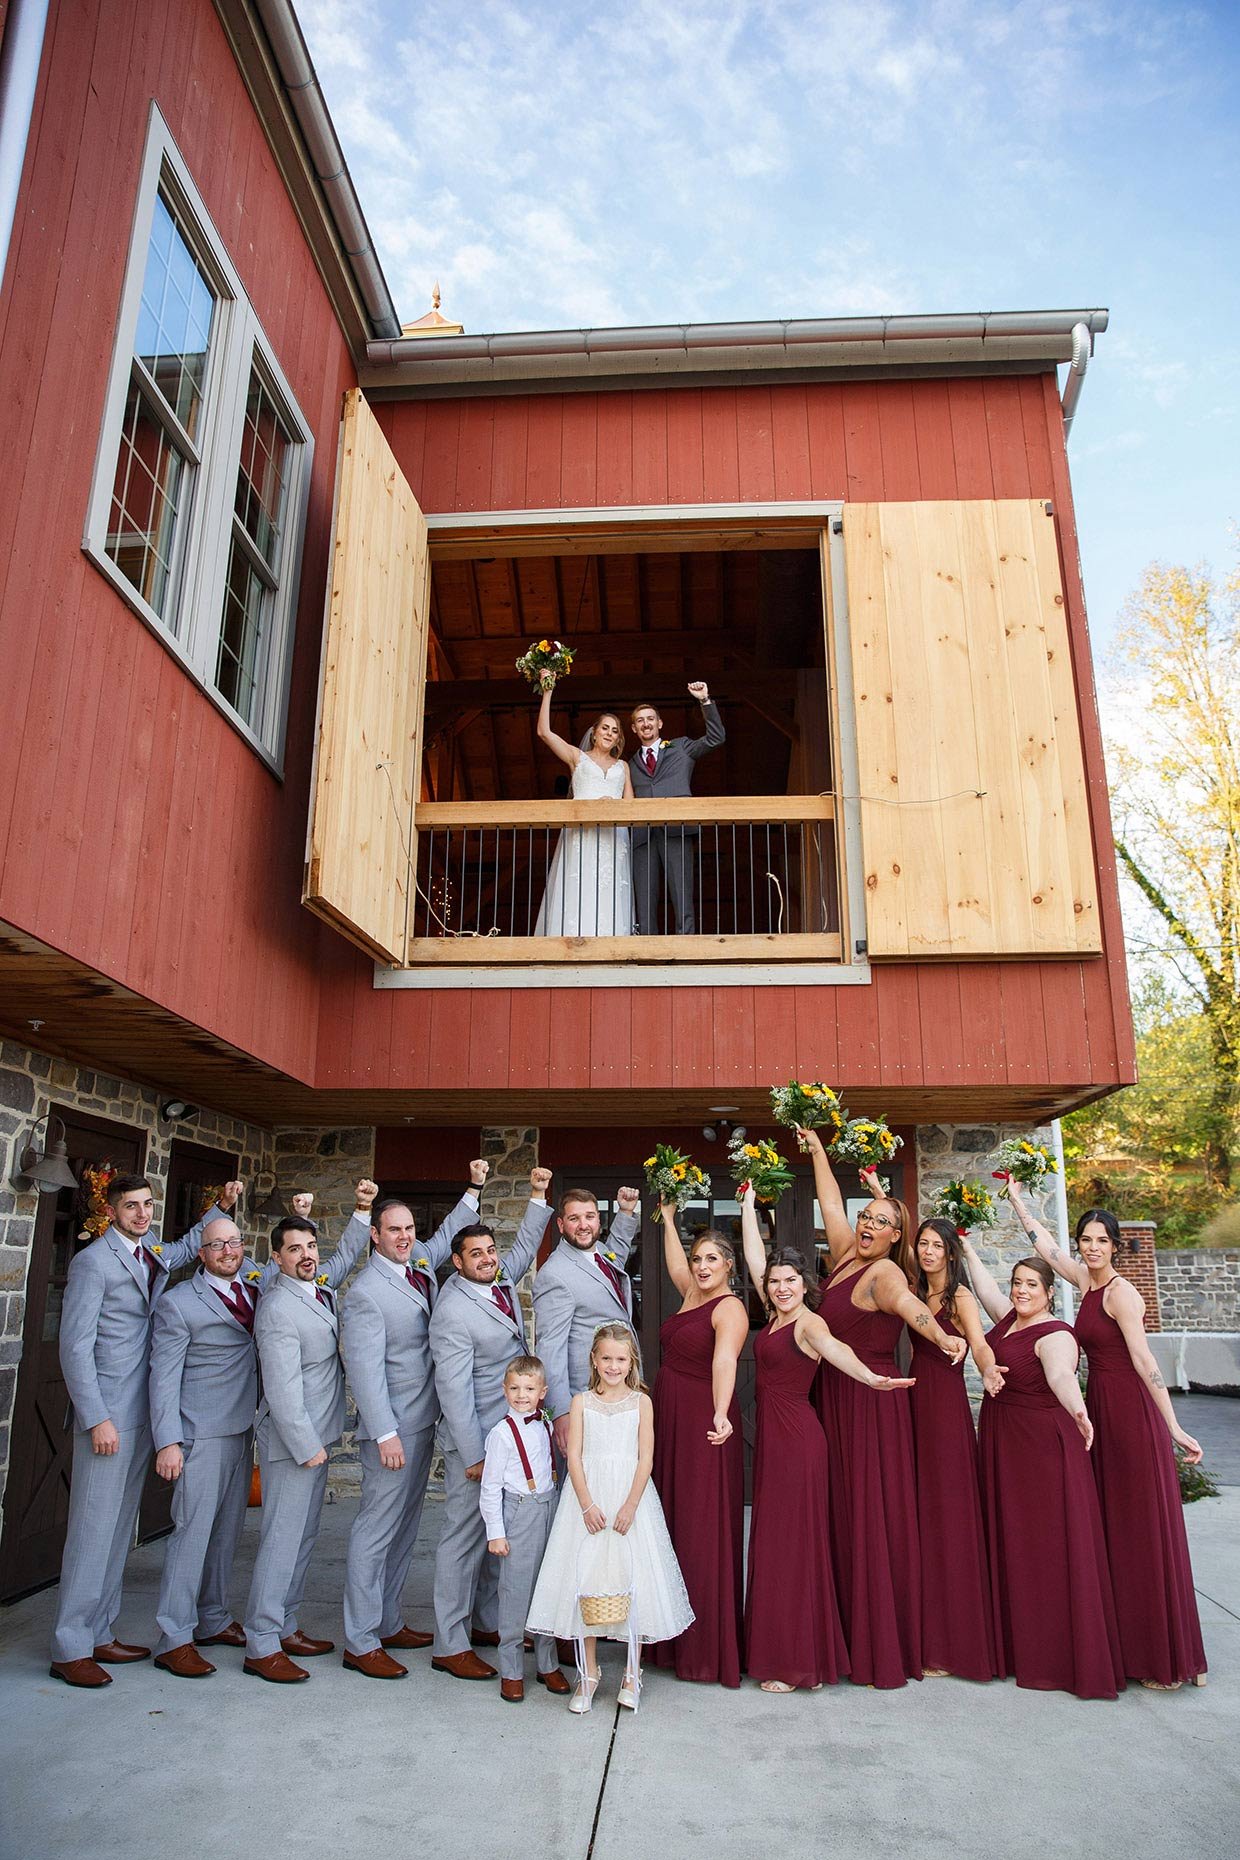 Bridal party celebrates bride and groom in front of barn